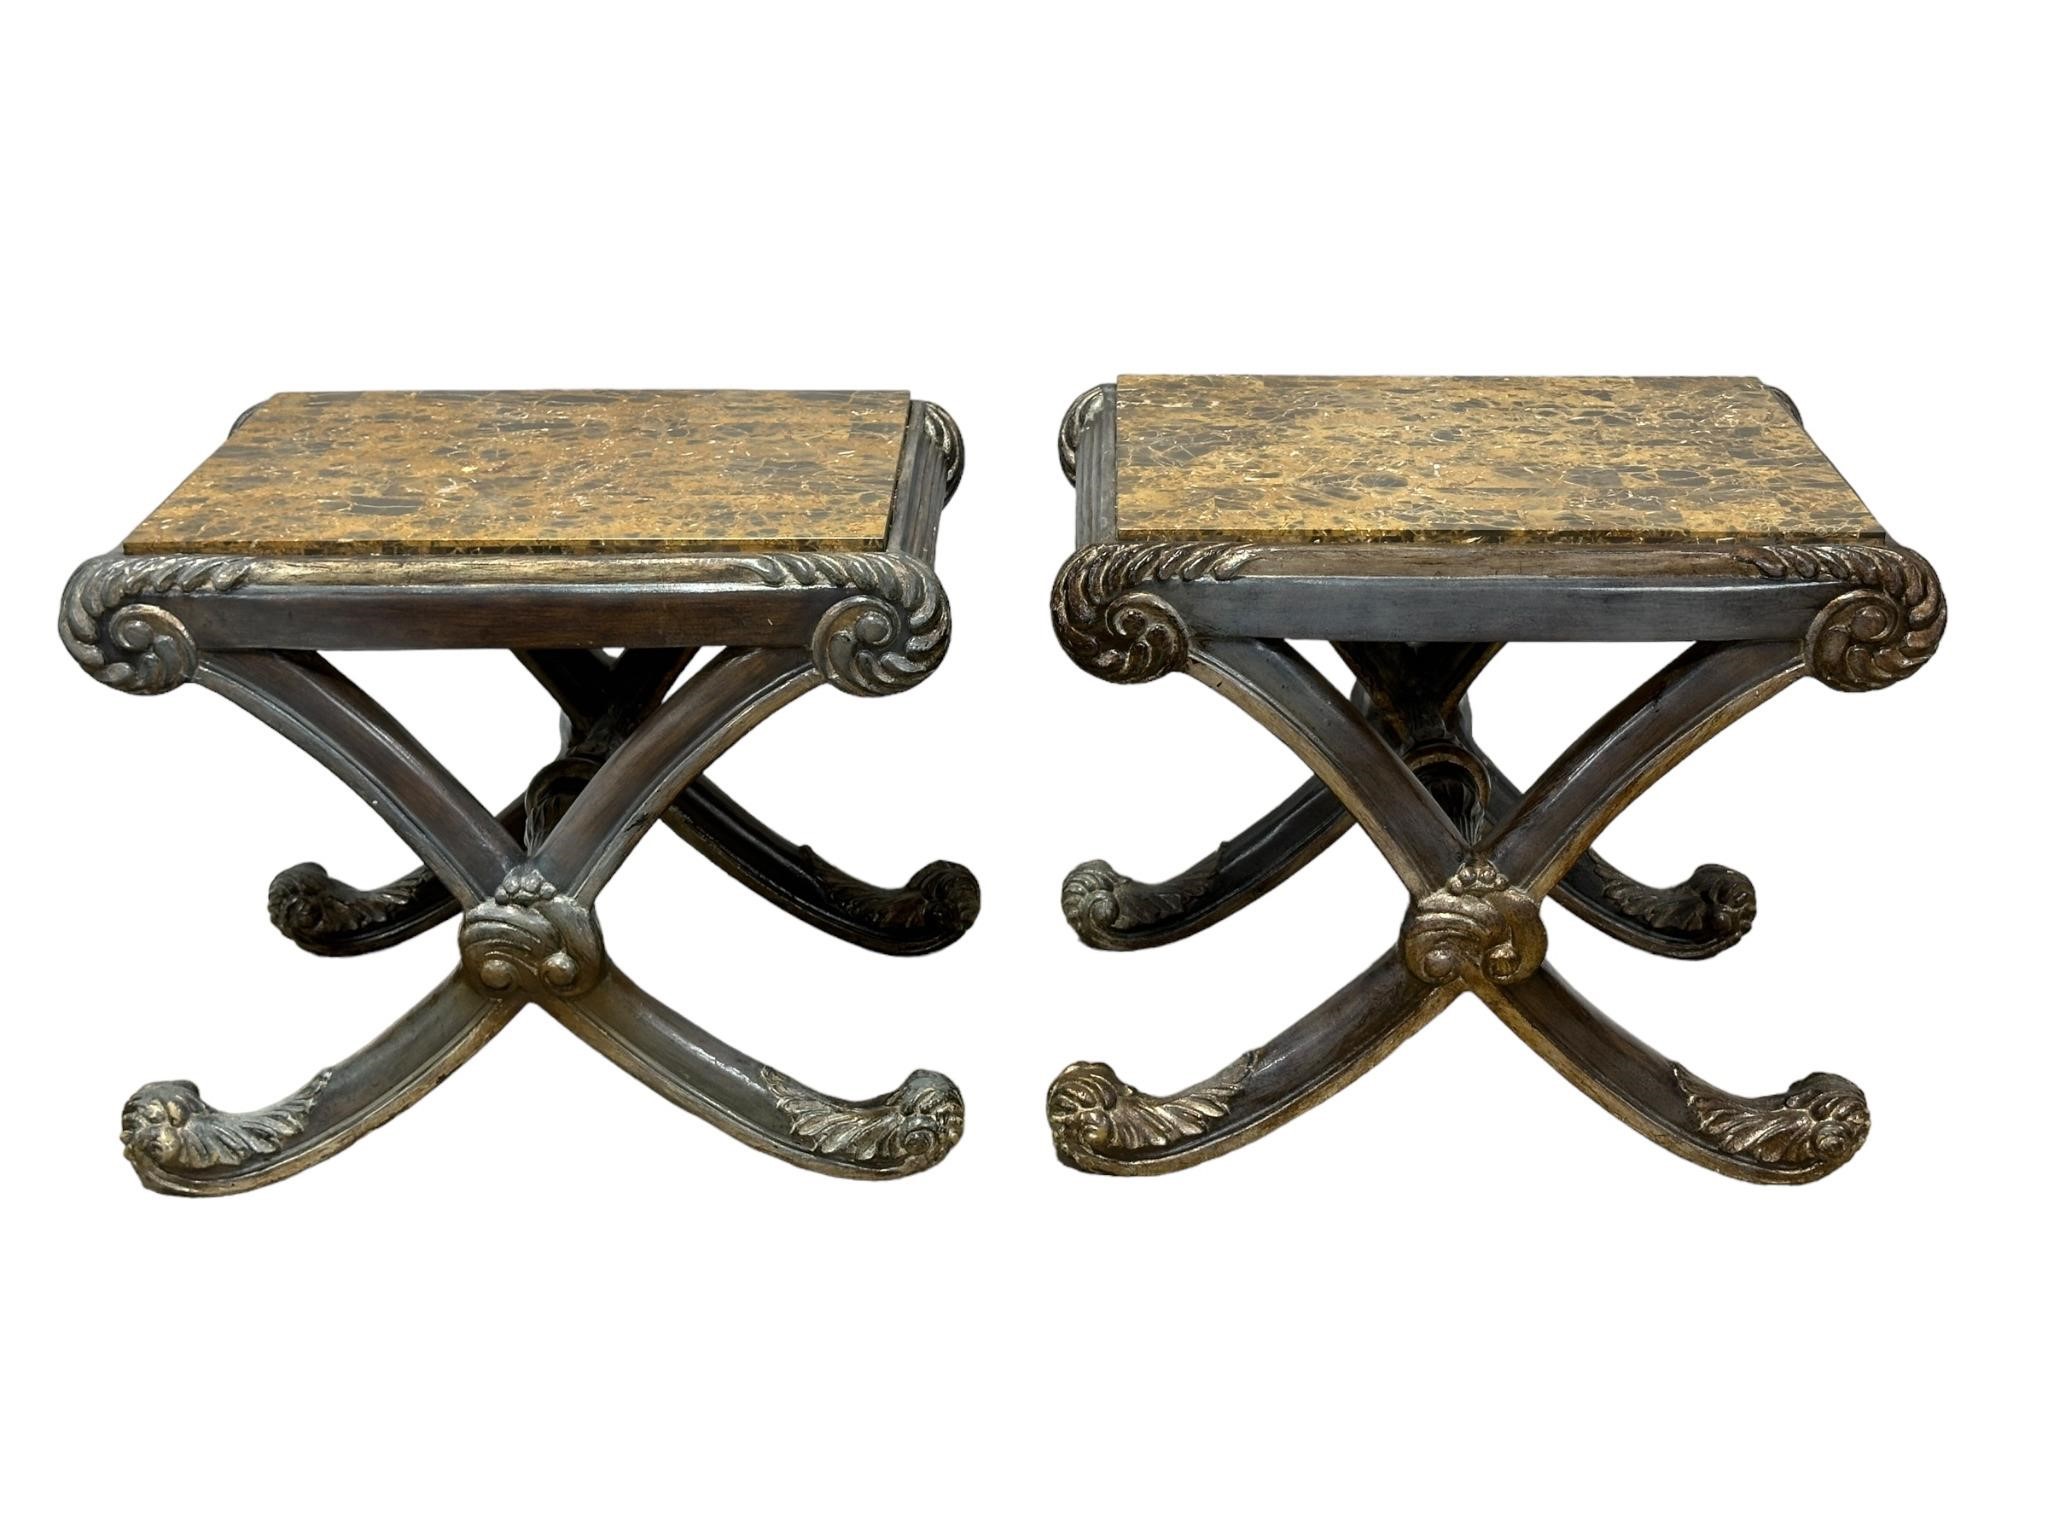 Pair of French Style Faux Marble Top Tables